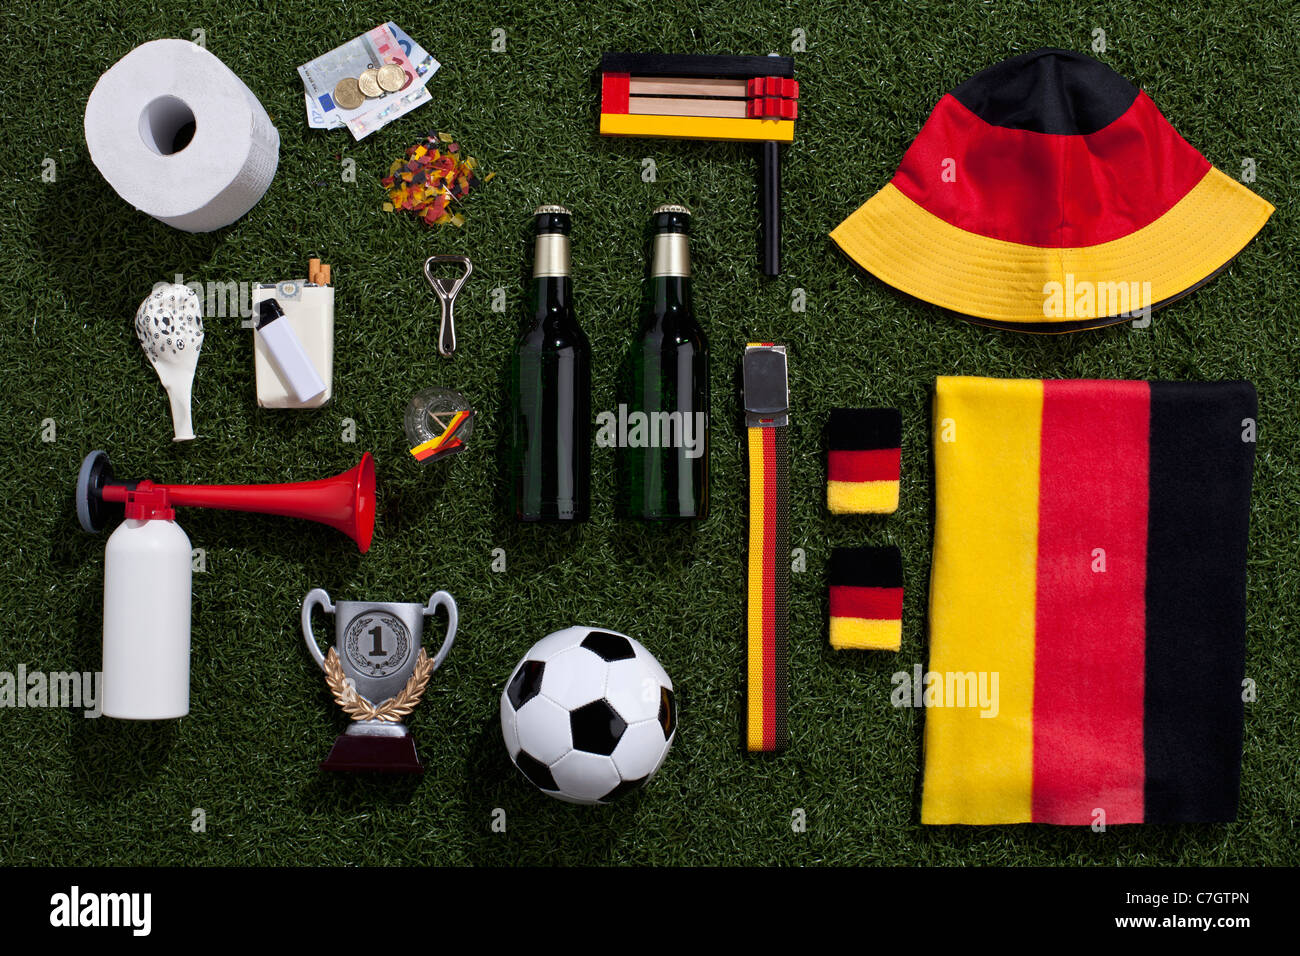 Sporting equipment and accessories arranged on turf Stock Photo